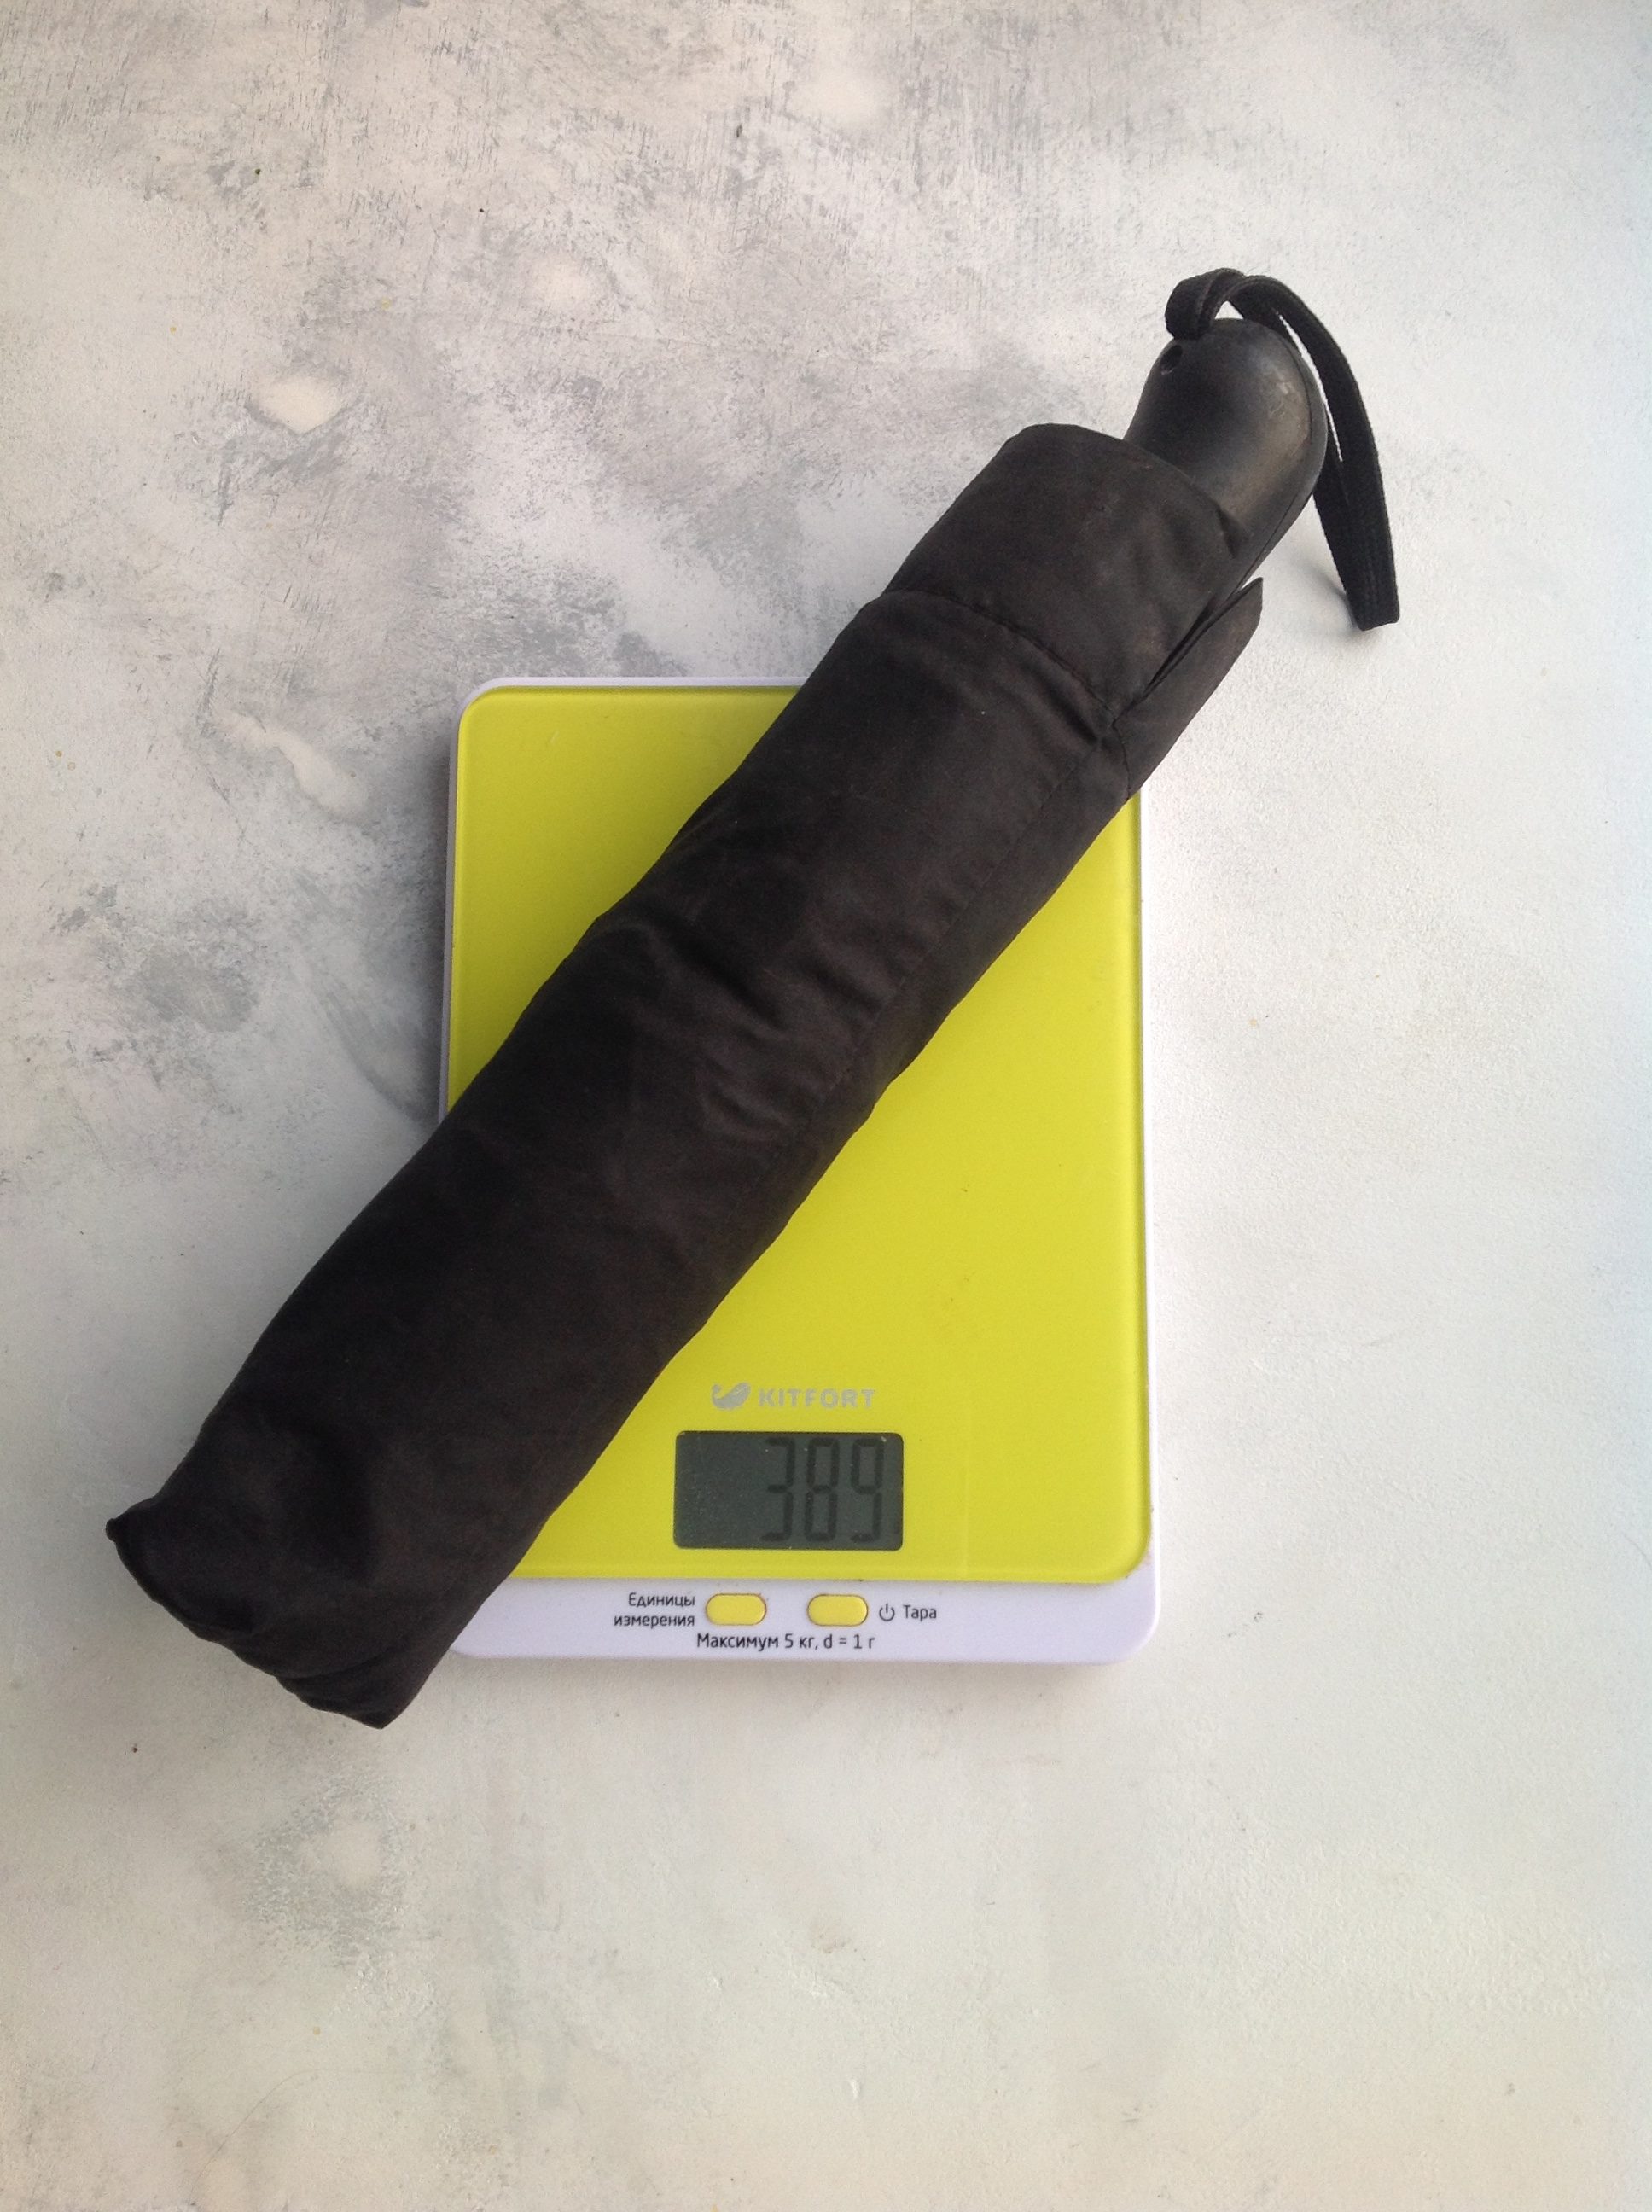 weight of folding umbrella with cover